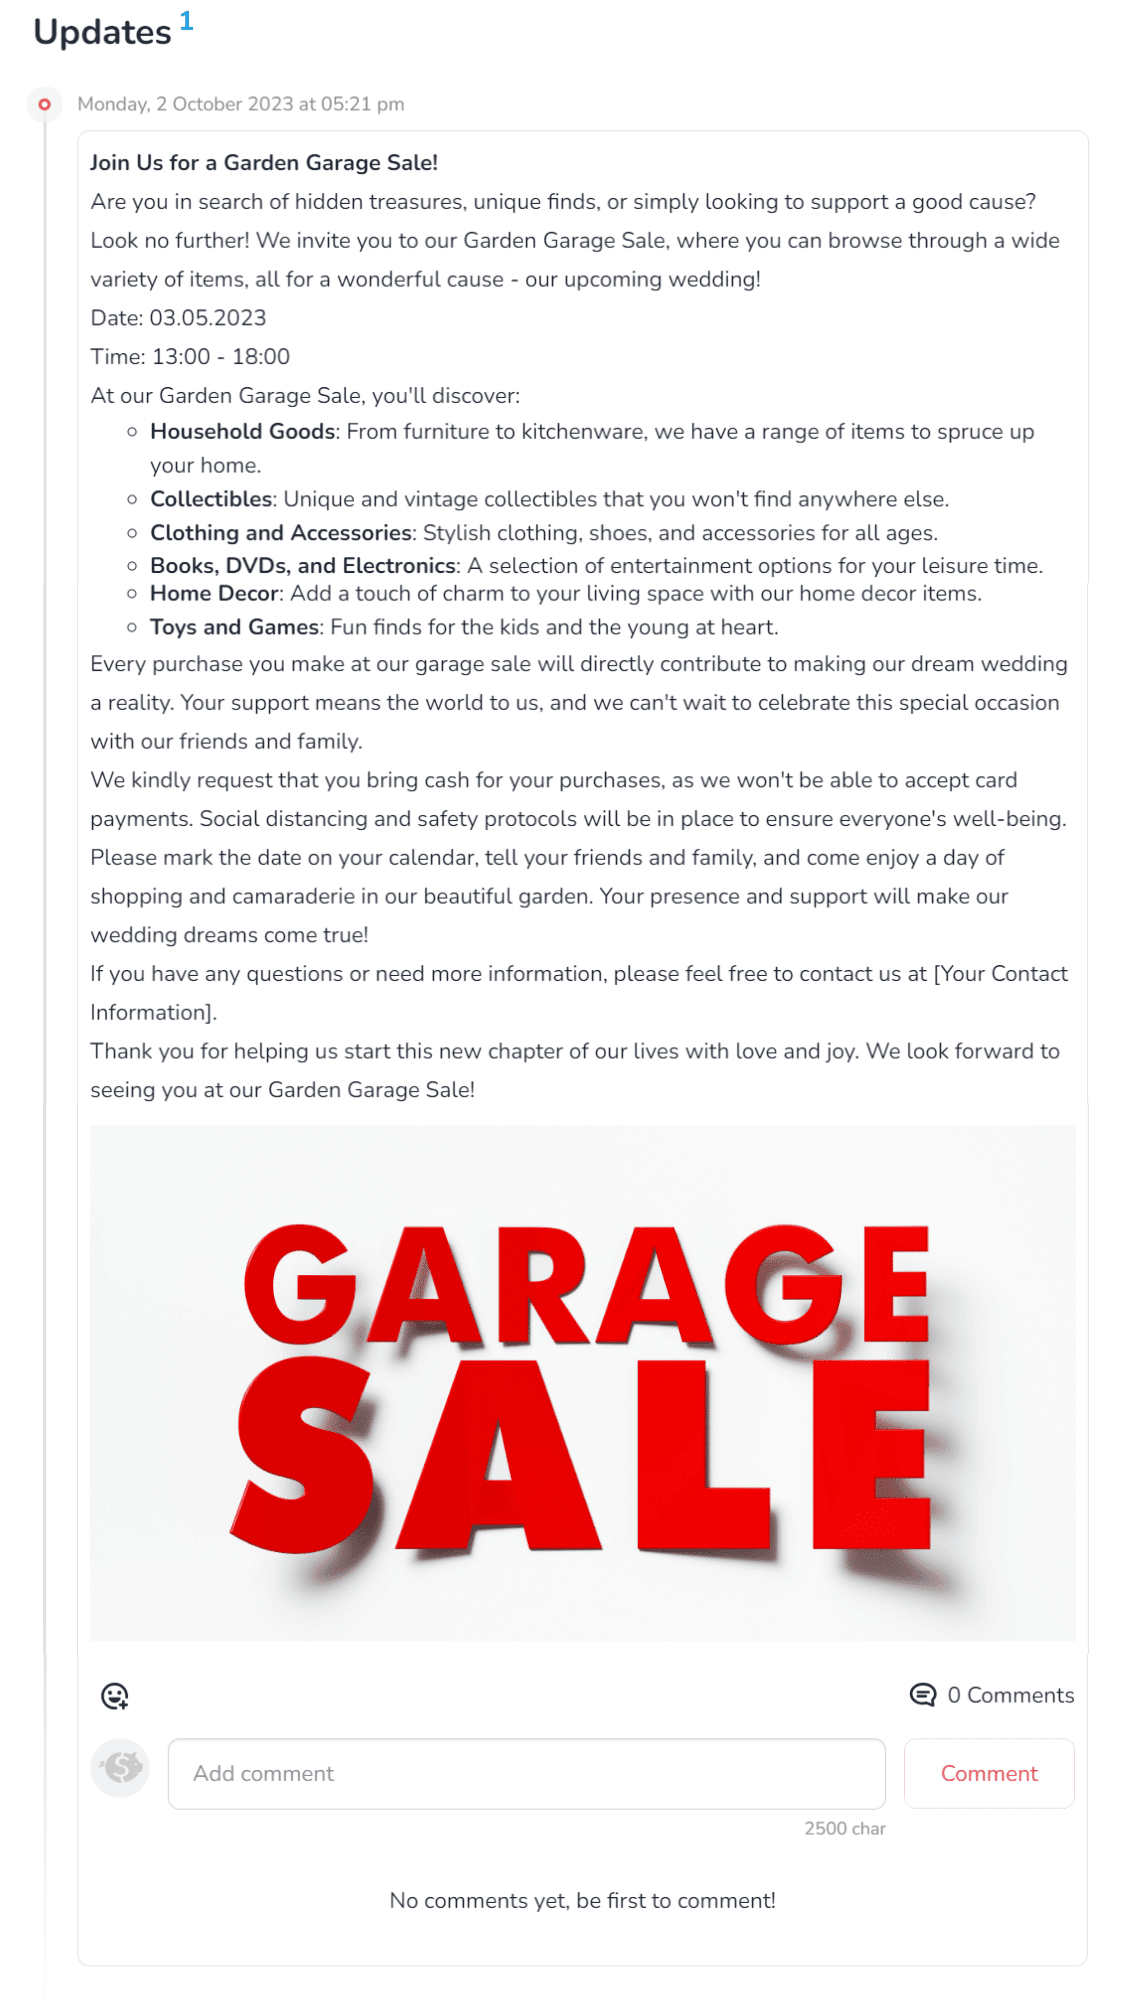 News view with information about the garage sale, all proceeds of which will go towards organising the wedding